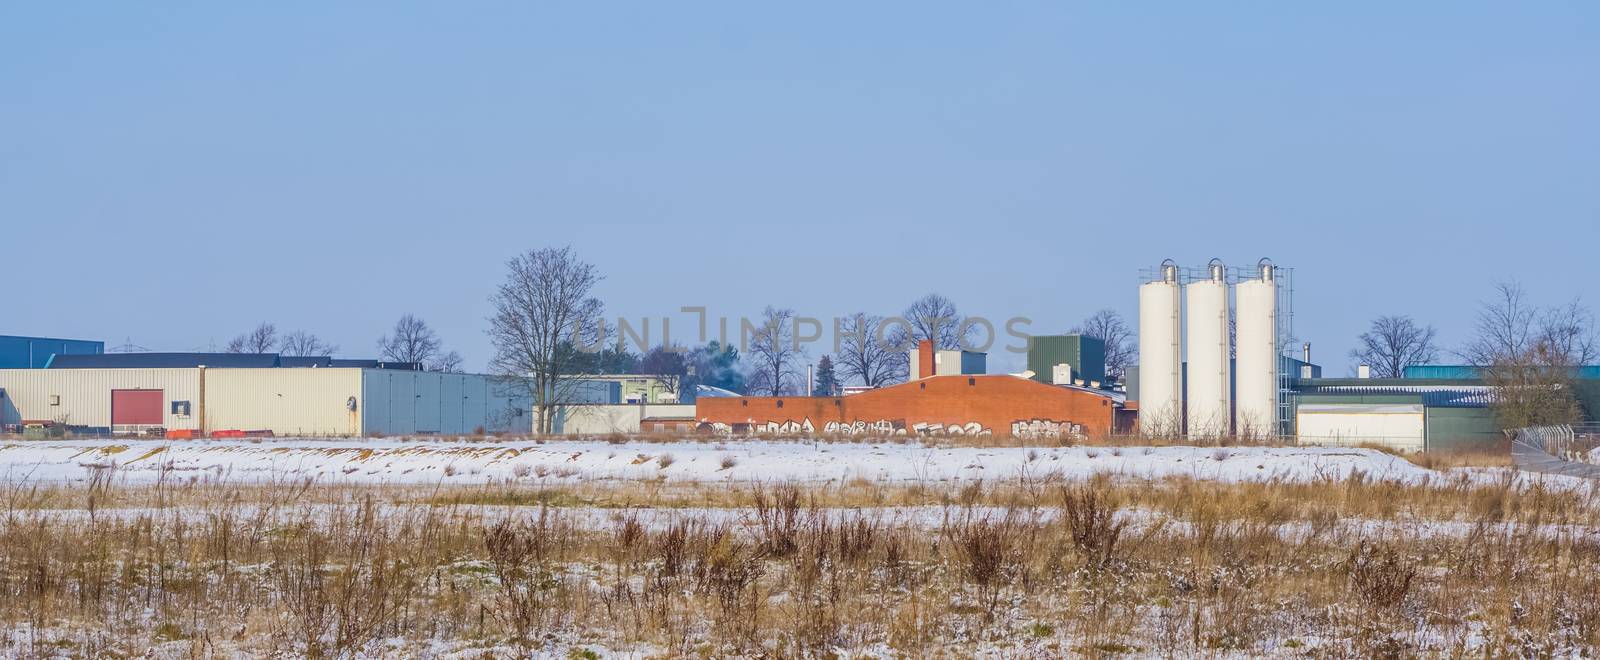 Dutch industry landscape with a warehouse and some white tanks, Majoppeveld a industrial terrain in the city of Roosendaal, The Netherlands